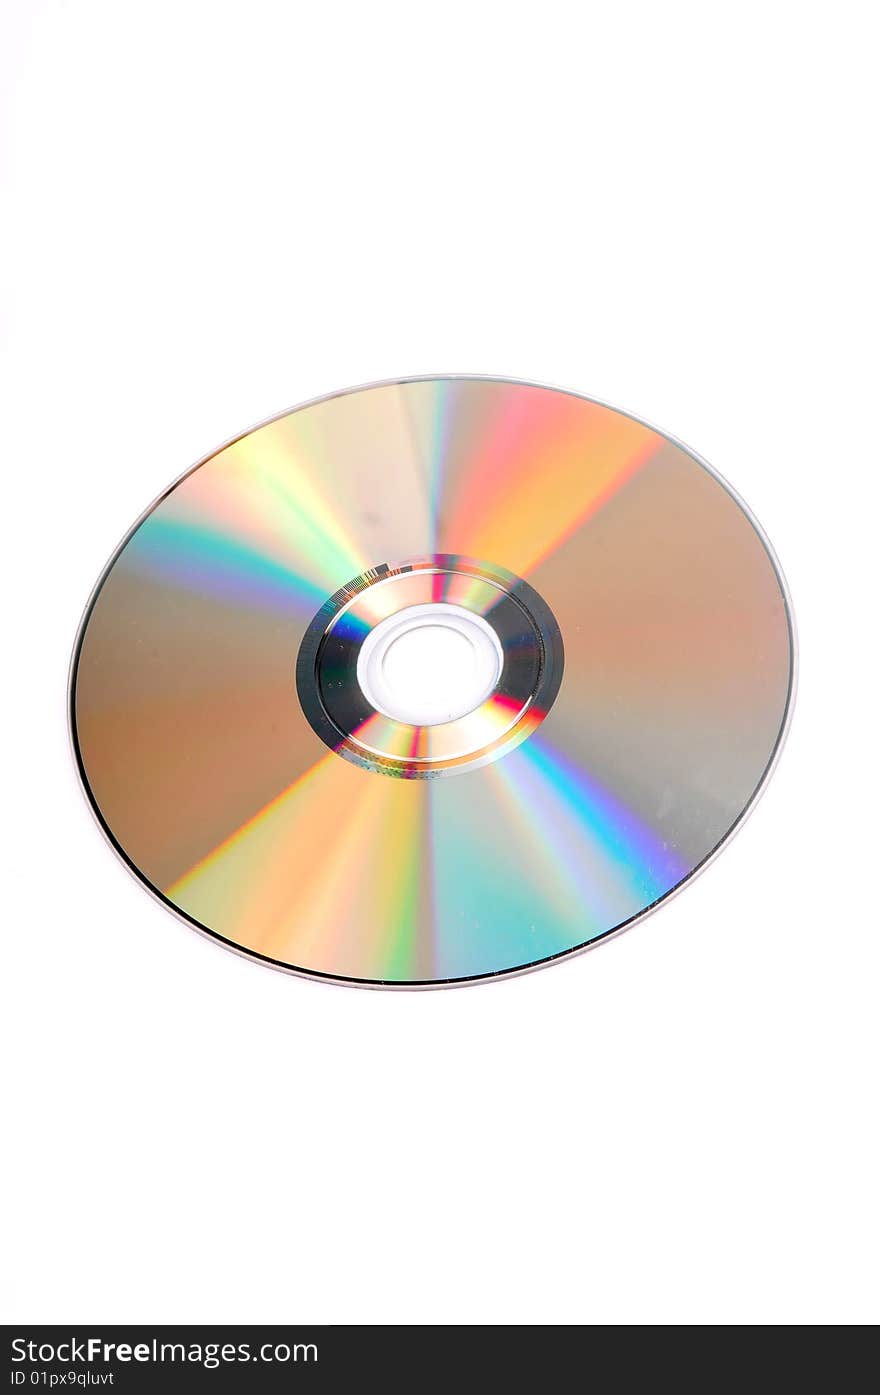 Compact disc isolated on white background.